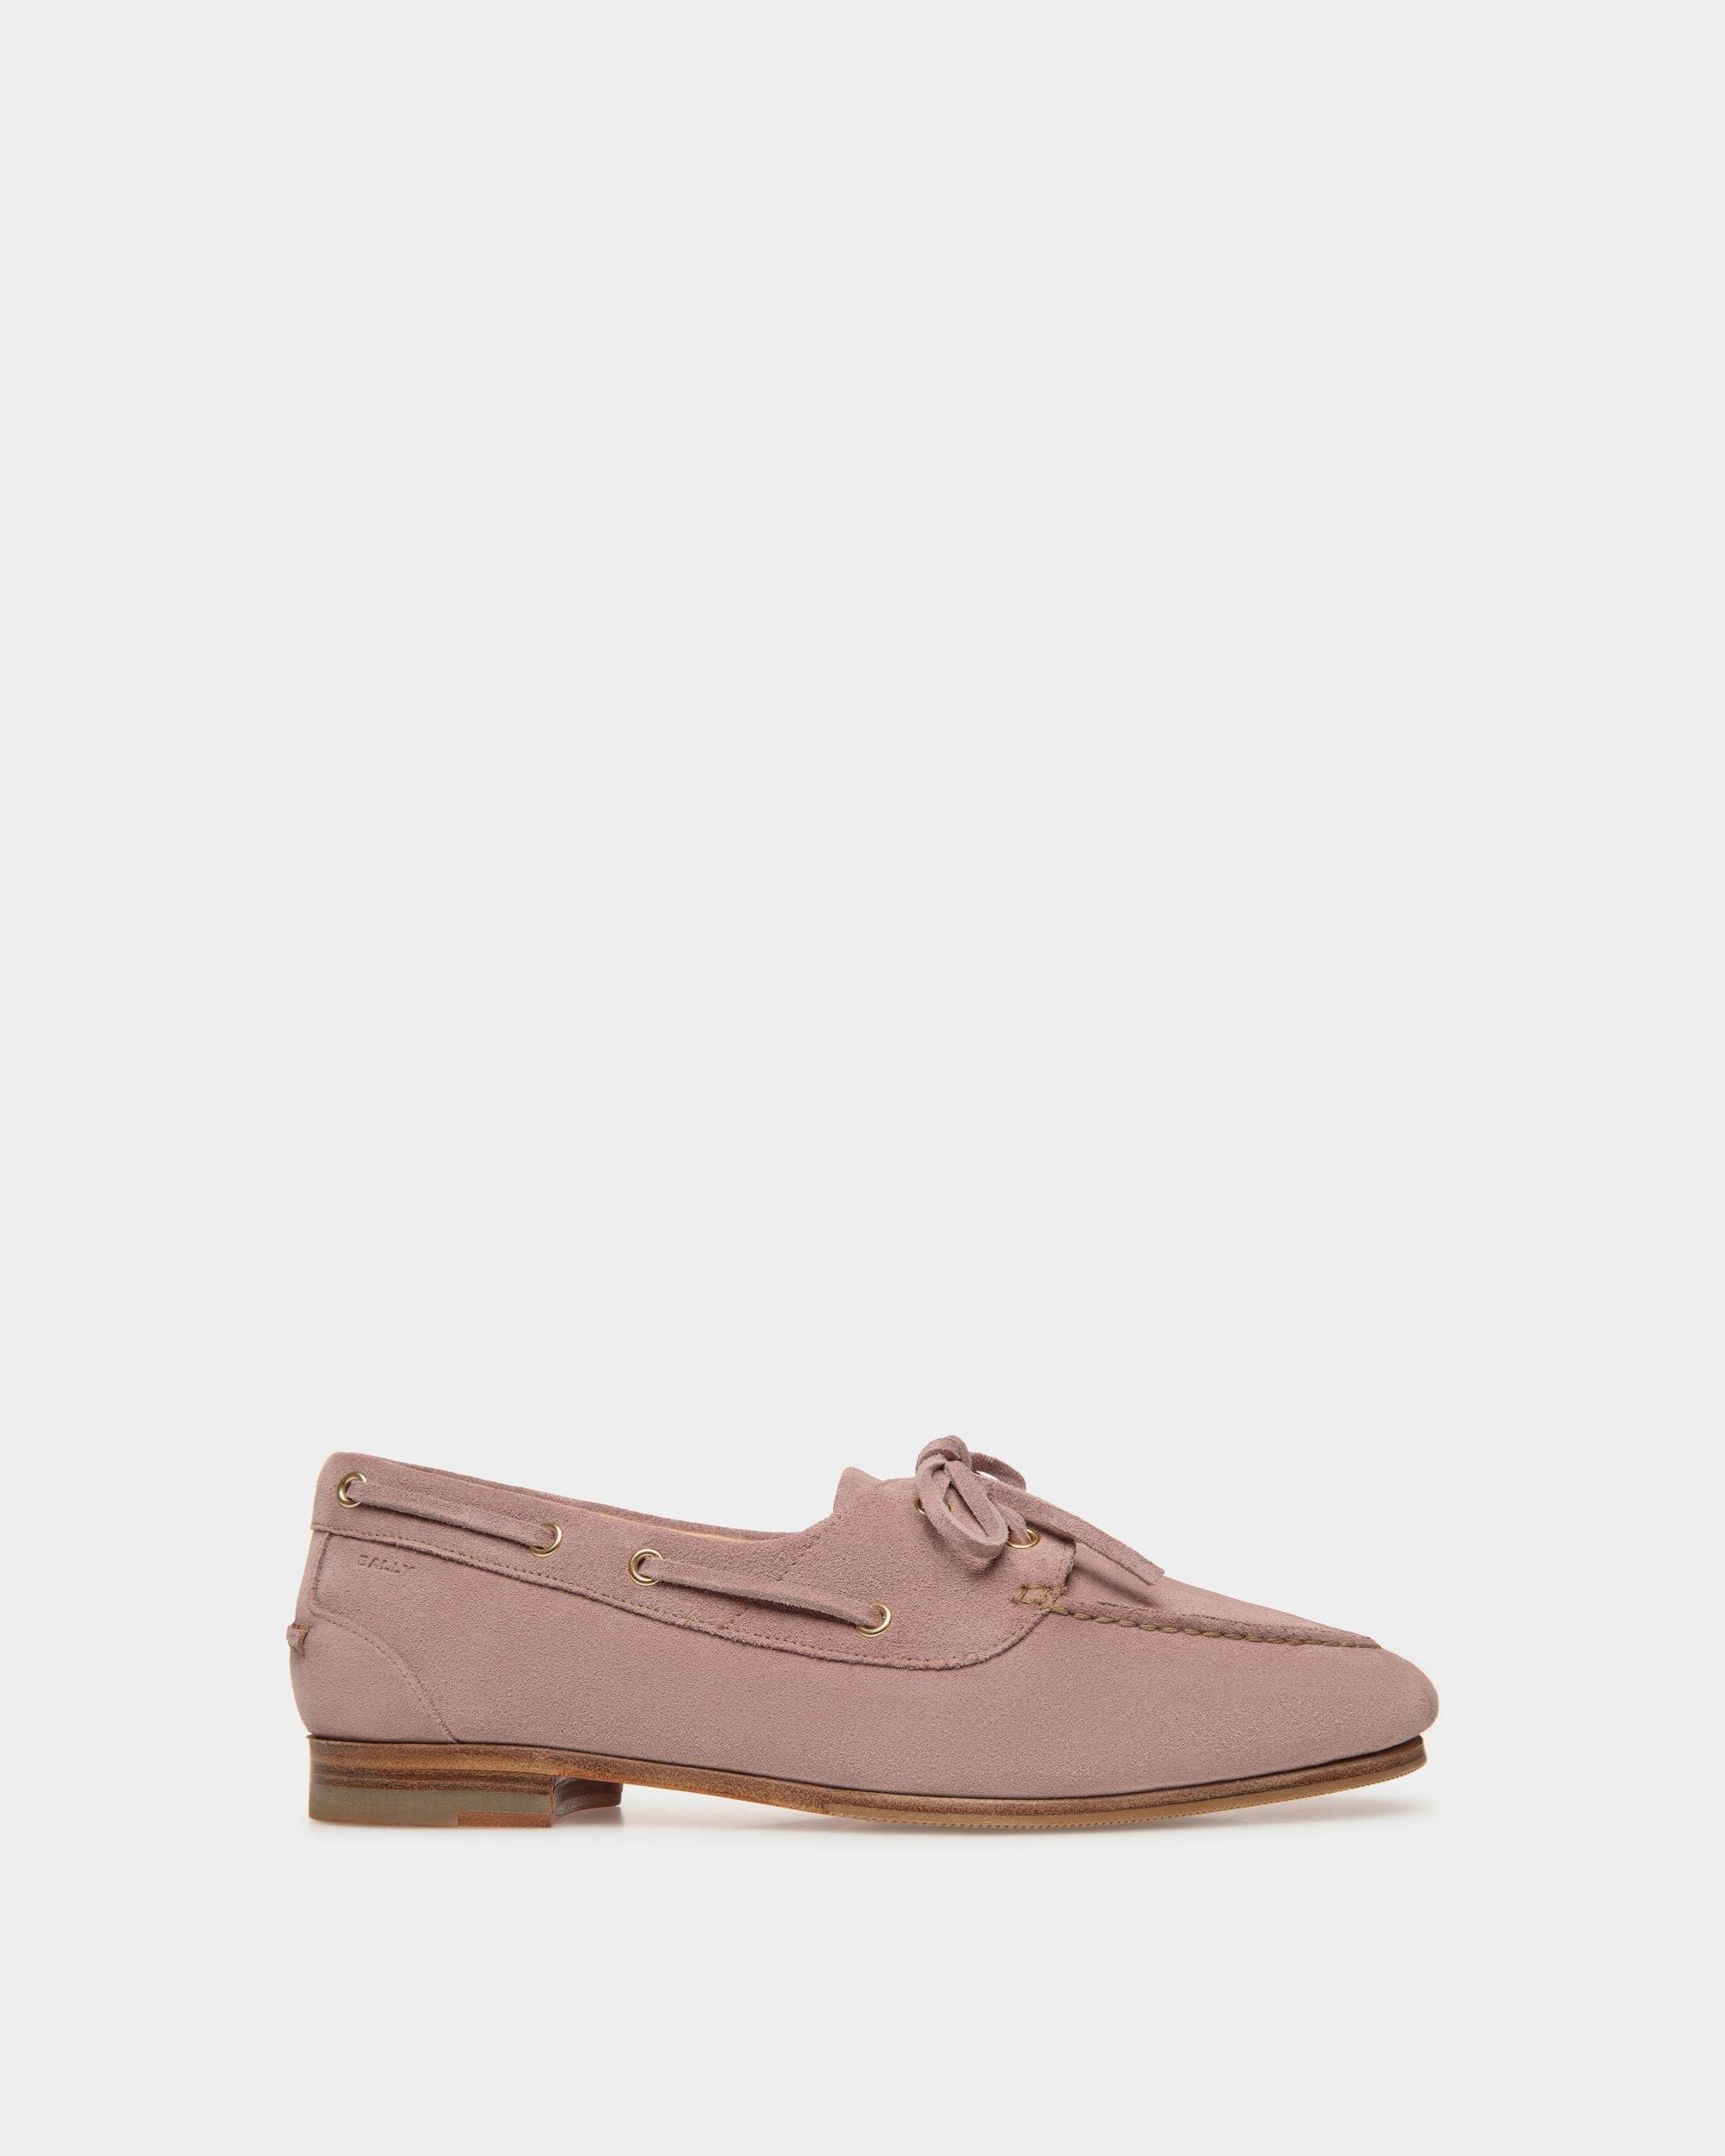 Women's Plume Moccasin in Light Mauve Suede | Bally | Still Life Side